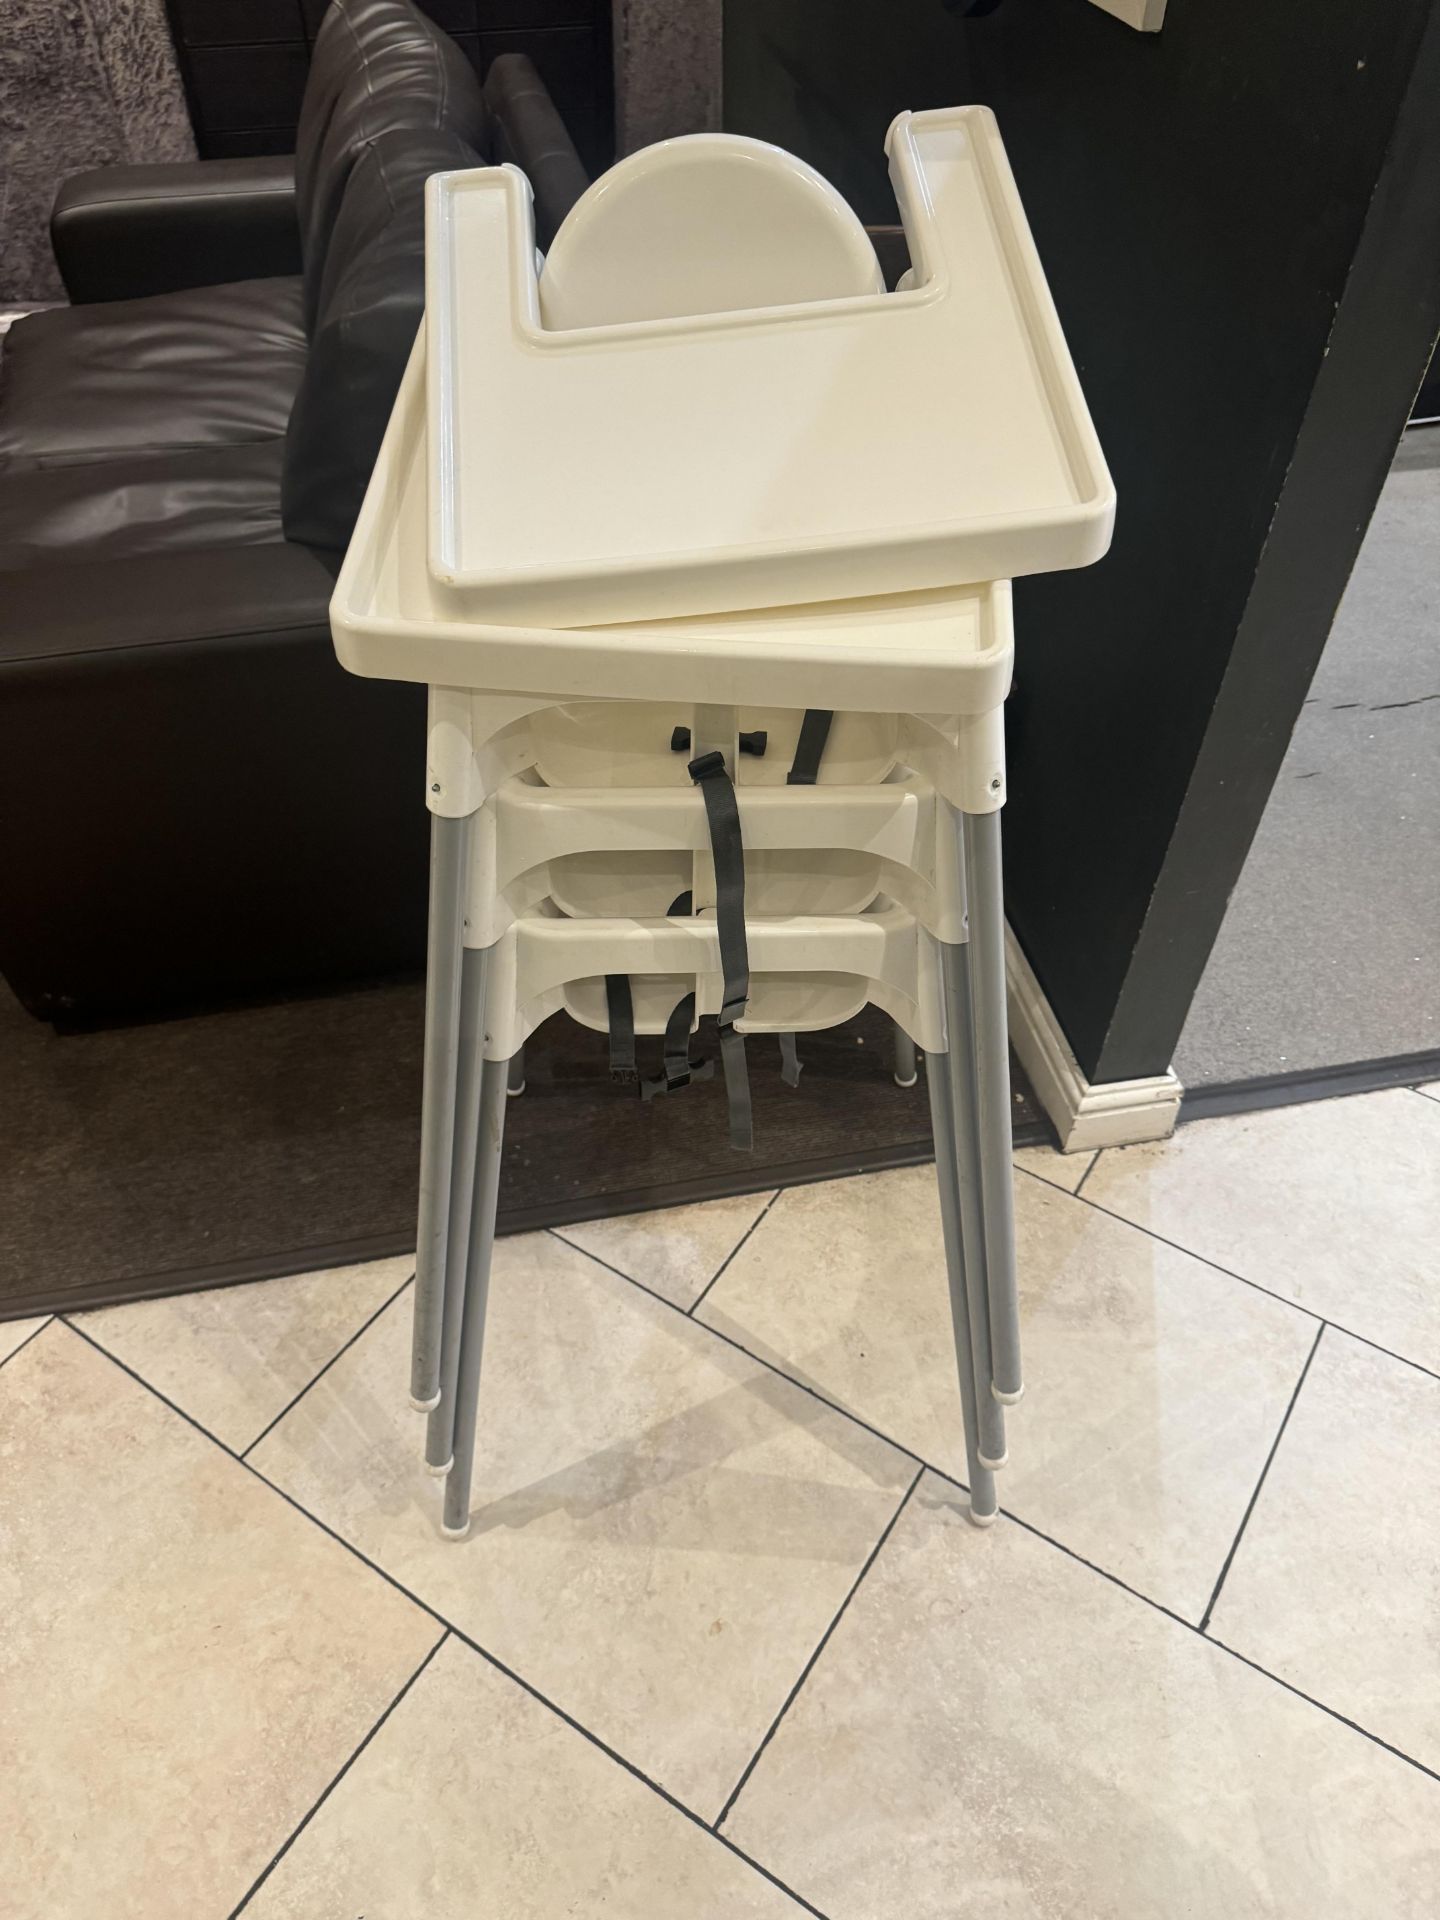 3 X HIGH CHAIRS - WHITE PLASTIC AND METAL LEGS 